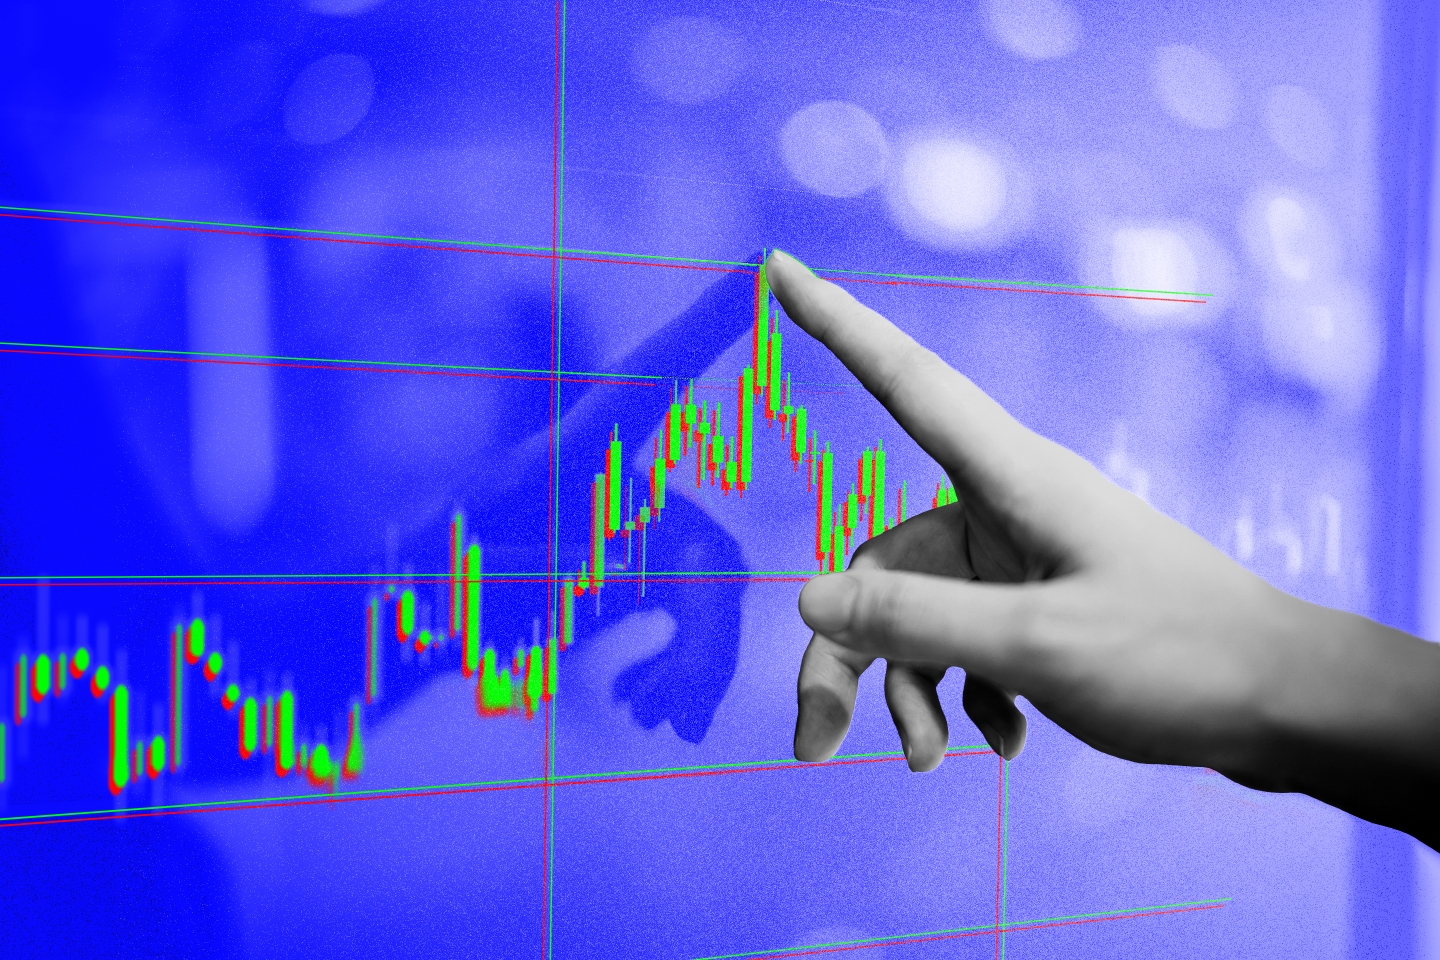 Photo illustration of a close up of a hand with the index finger pointing and touching the top point on a stock candlestick chart.